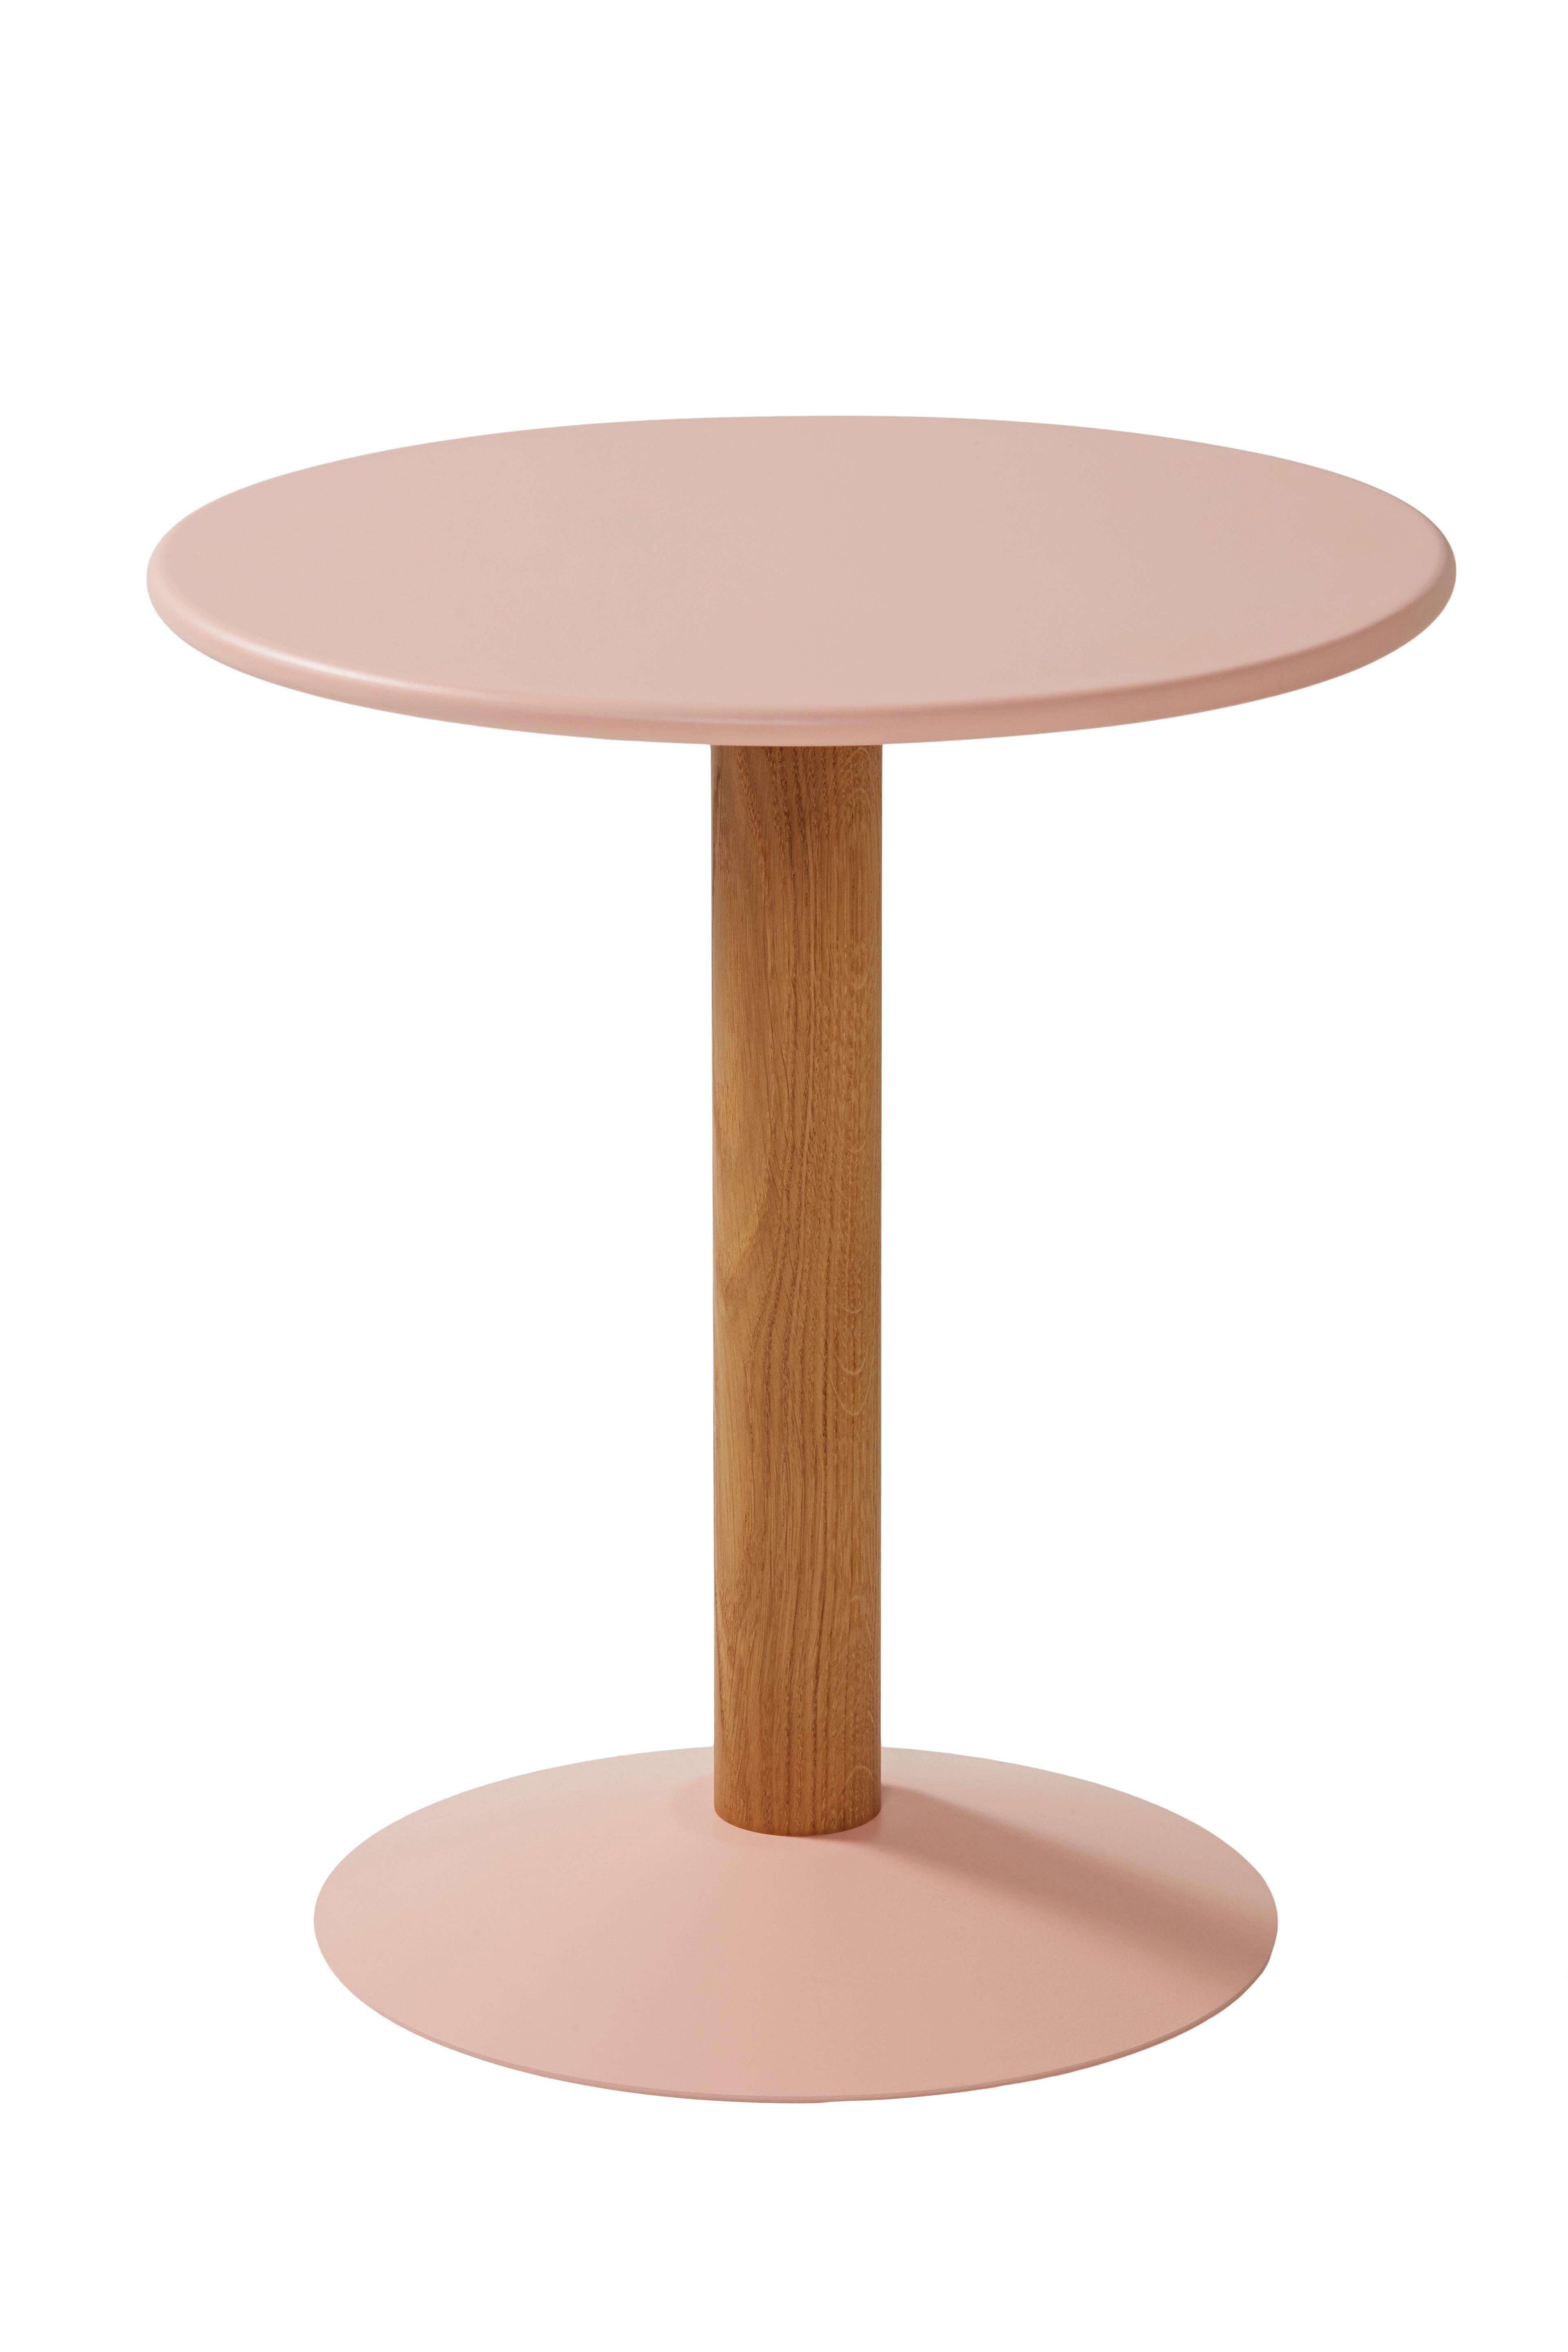 The C16 Pedestal table mixes and matches noble materials: steel for the tabletop and base, and solid oak for the column. This table’s restrained contours give it a timeless style. In light or pastel colors, it brightens up a child’s room. Next to a